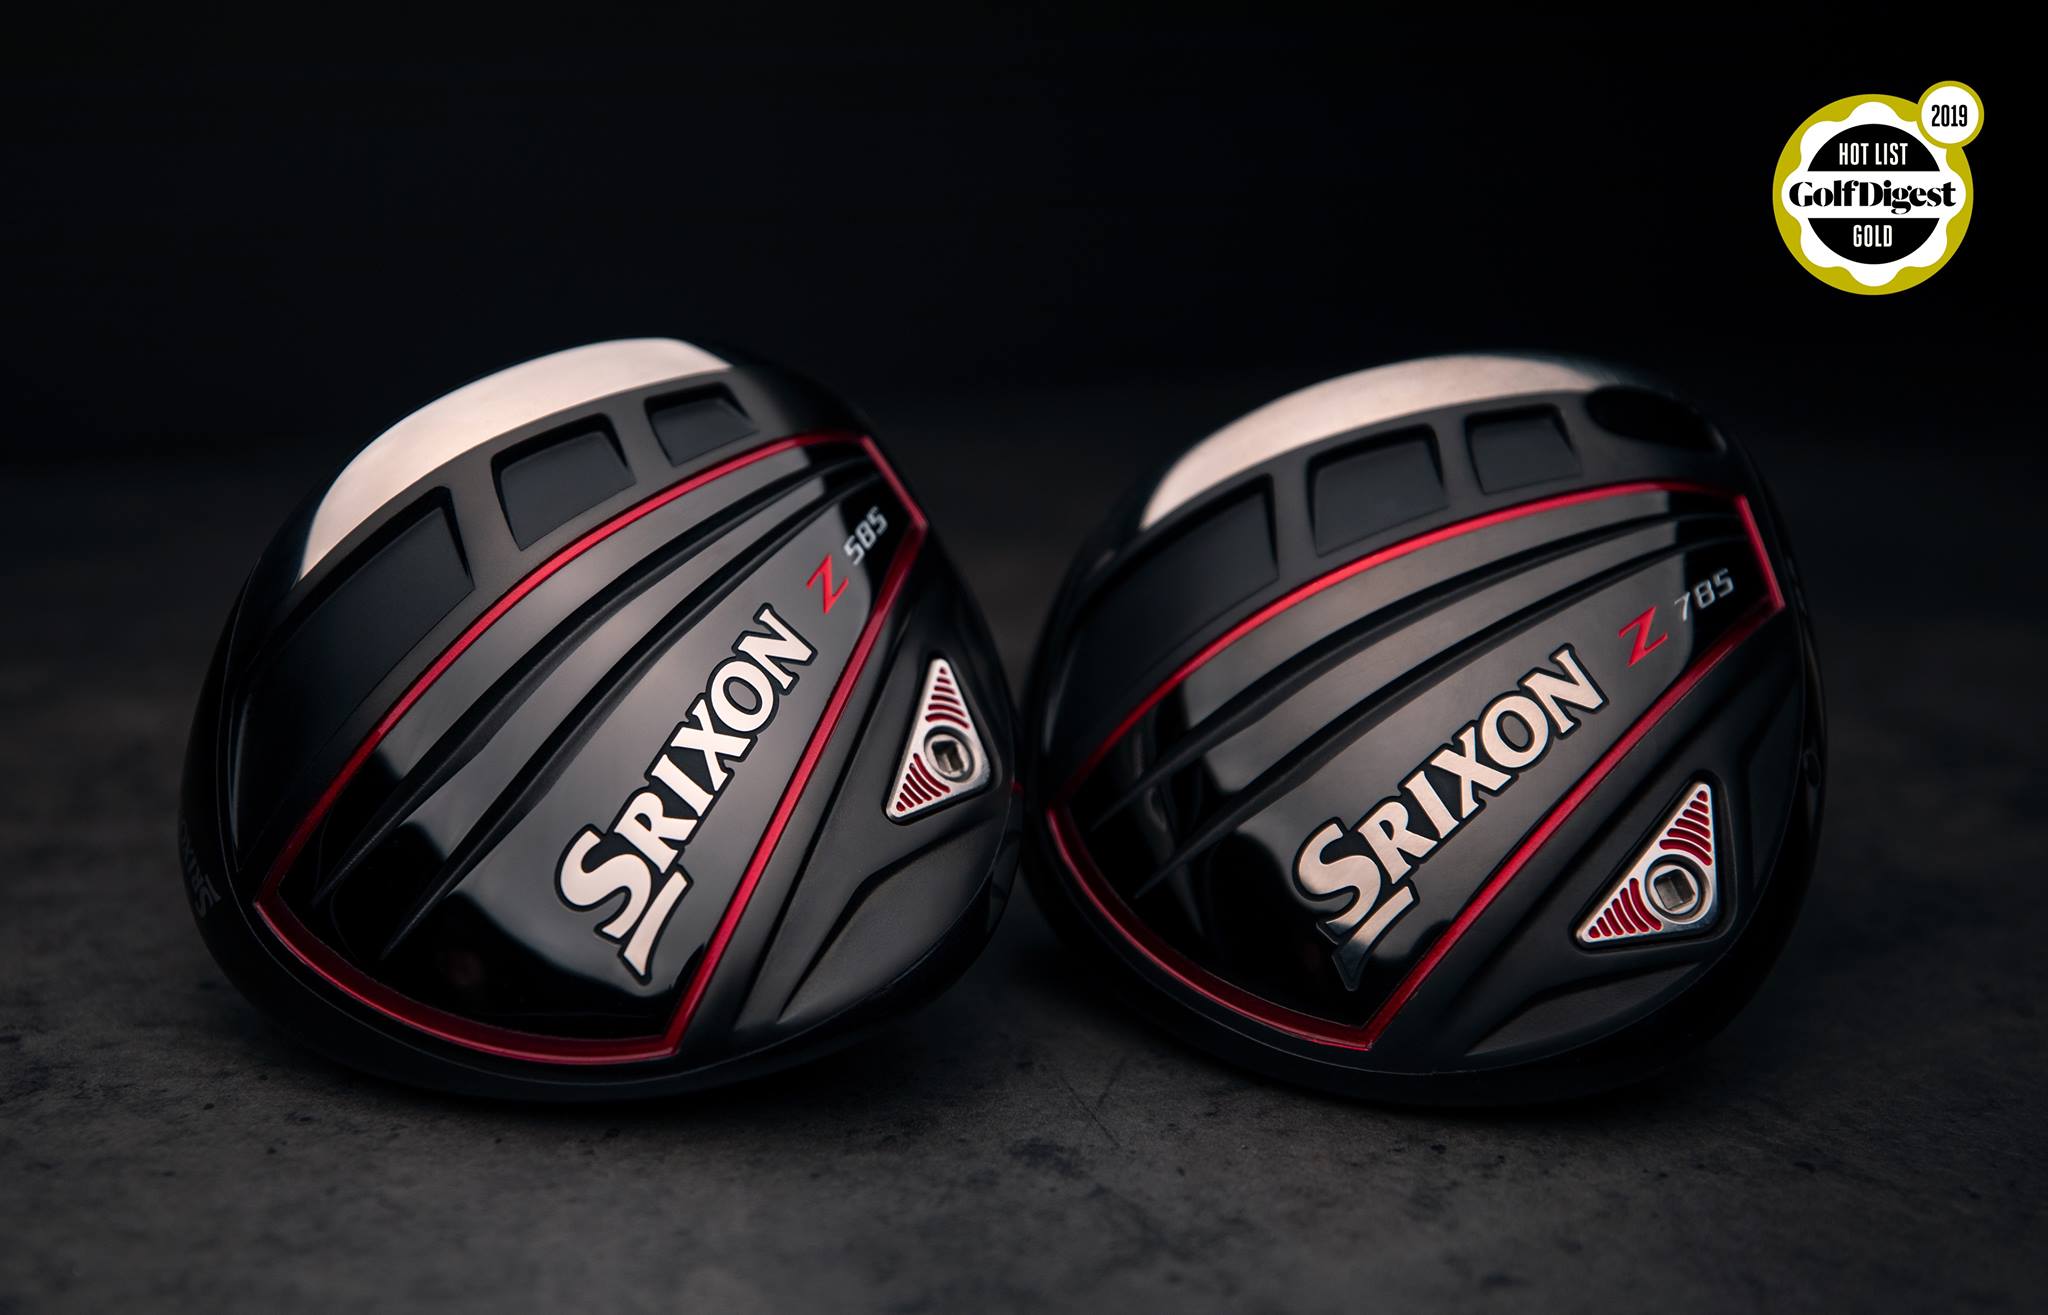 Srixon Golf Ball Fitting at Independence Golf Club - March